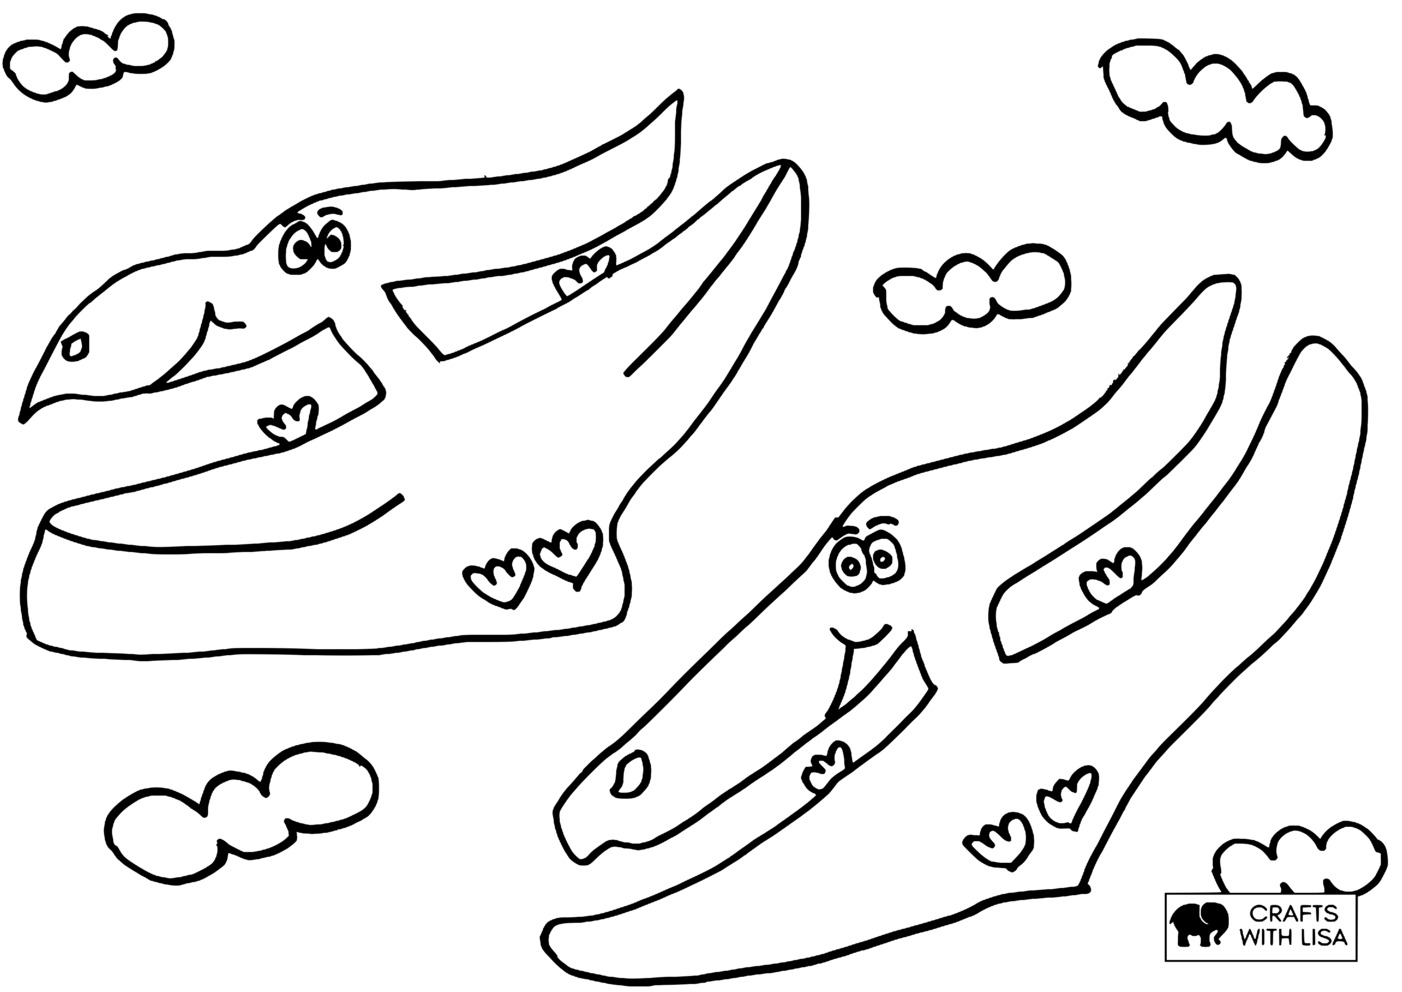 Coloring page